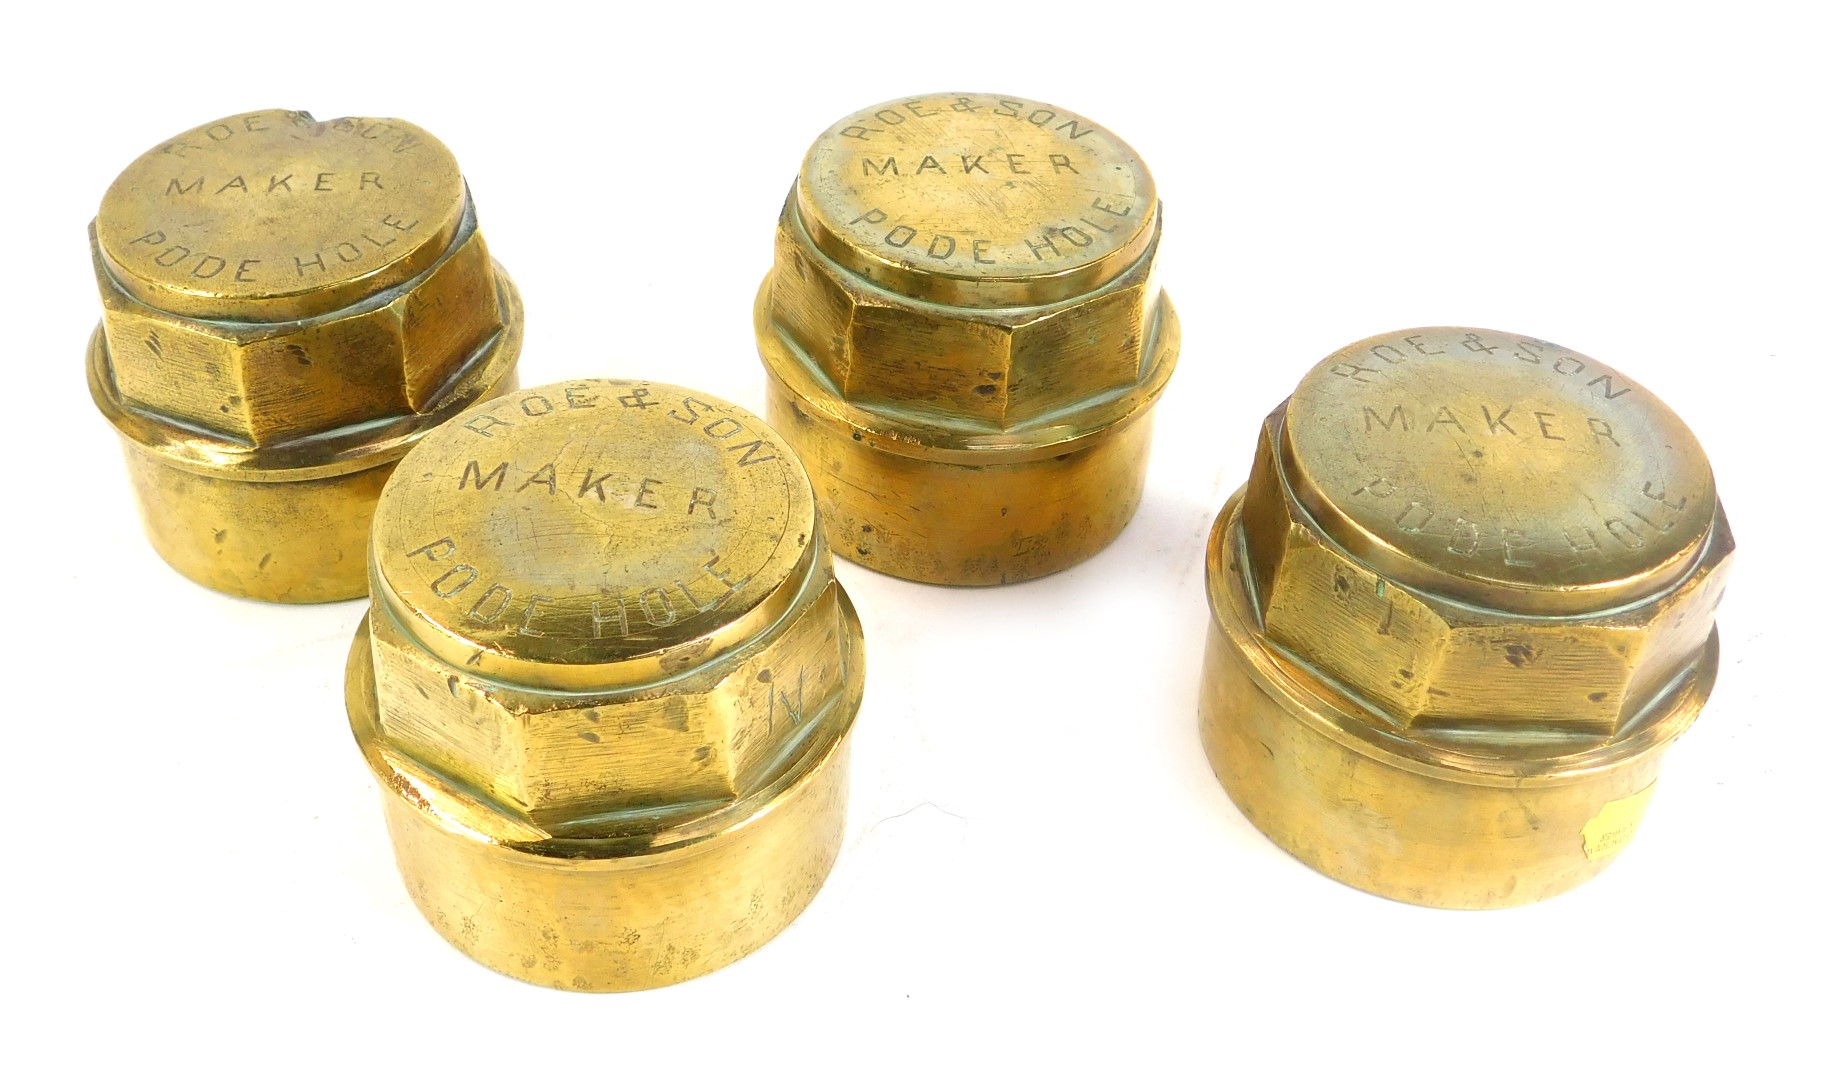 Four brass hubcaps, by Roe & Son Pode Hole.